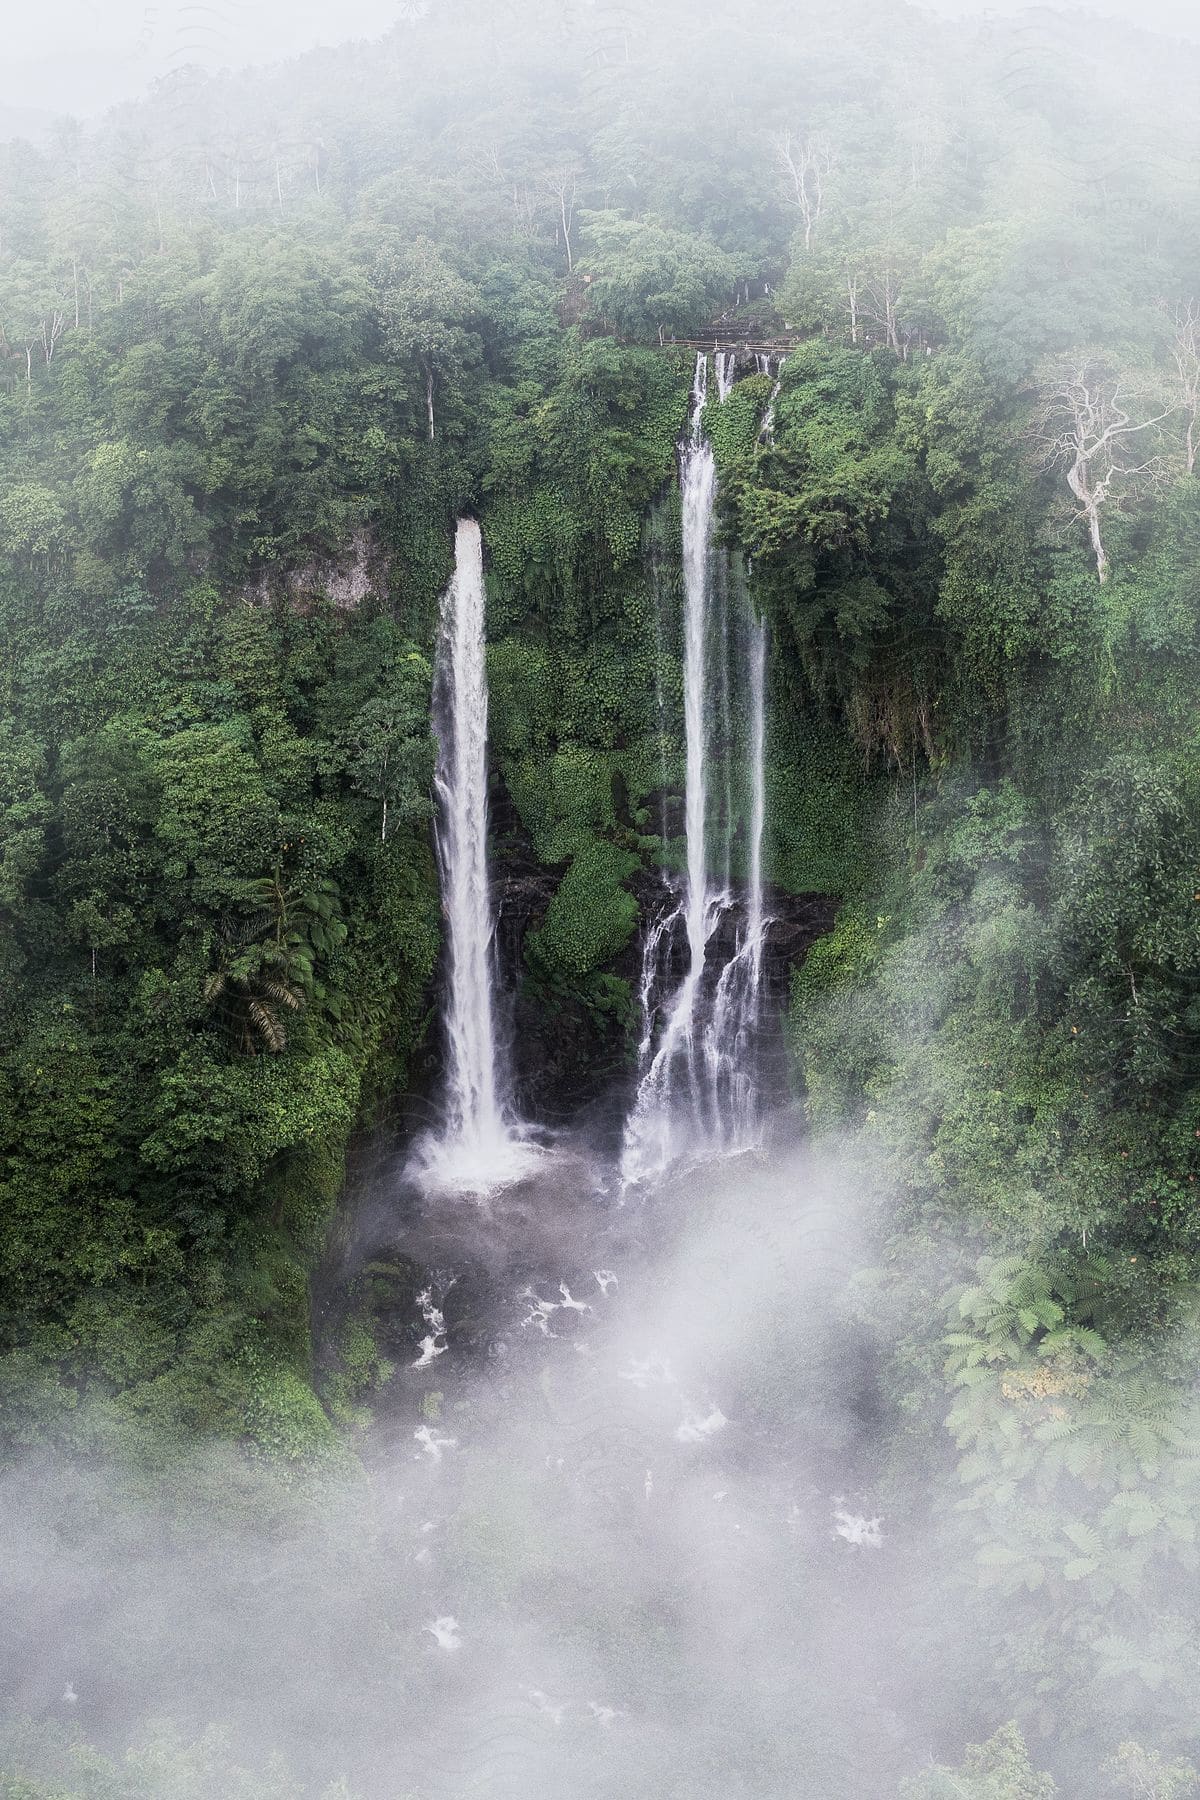 Waterfalls flowing down a cliff covered in dense vegetation with fog.